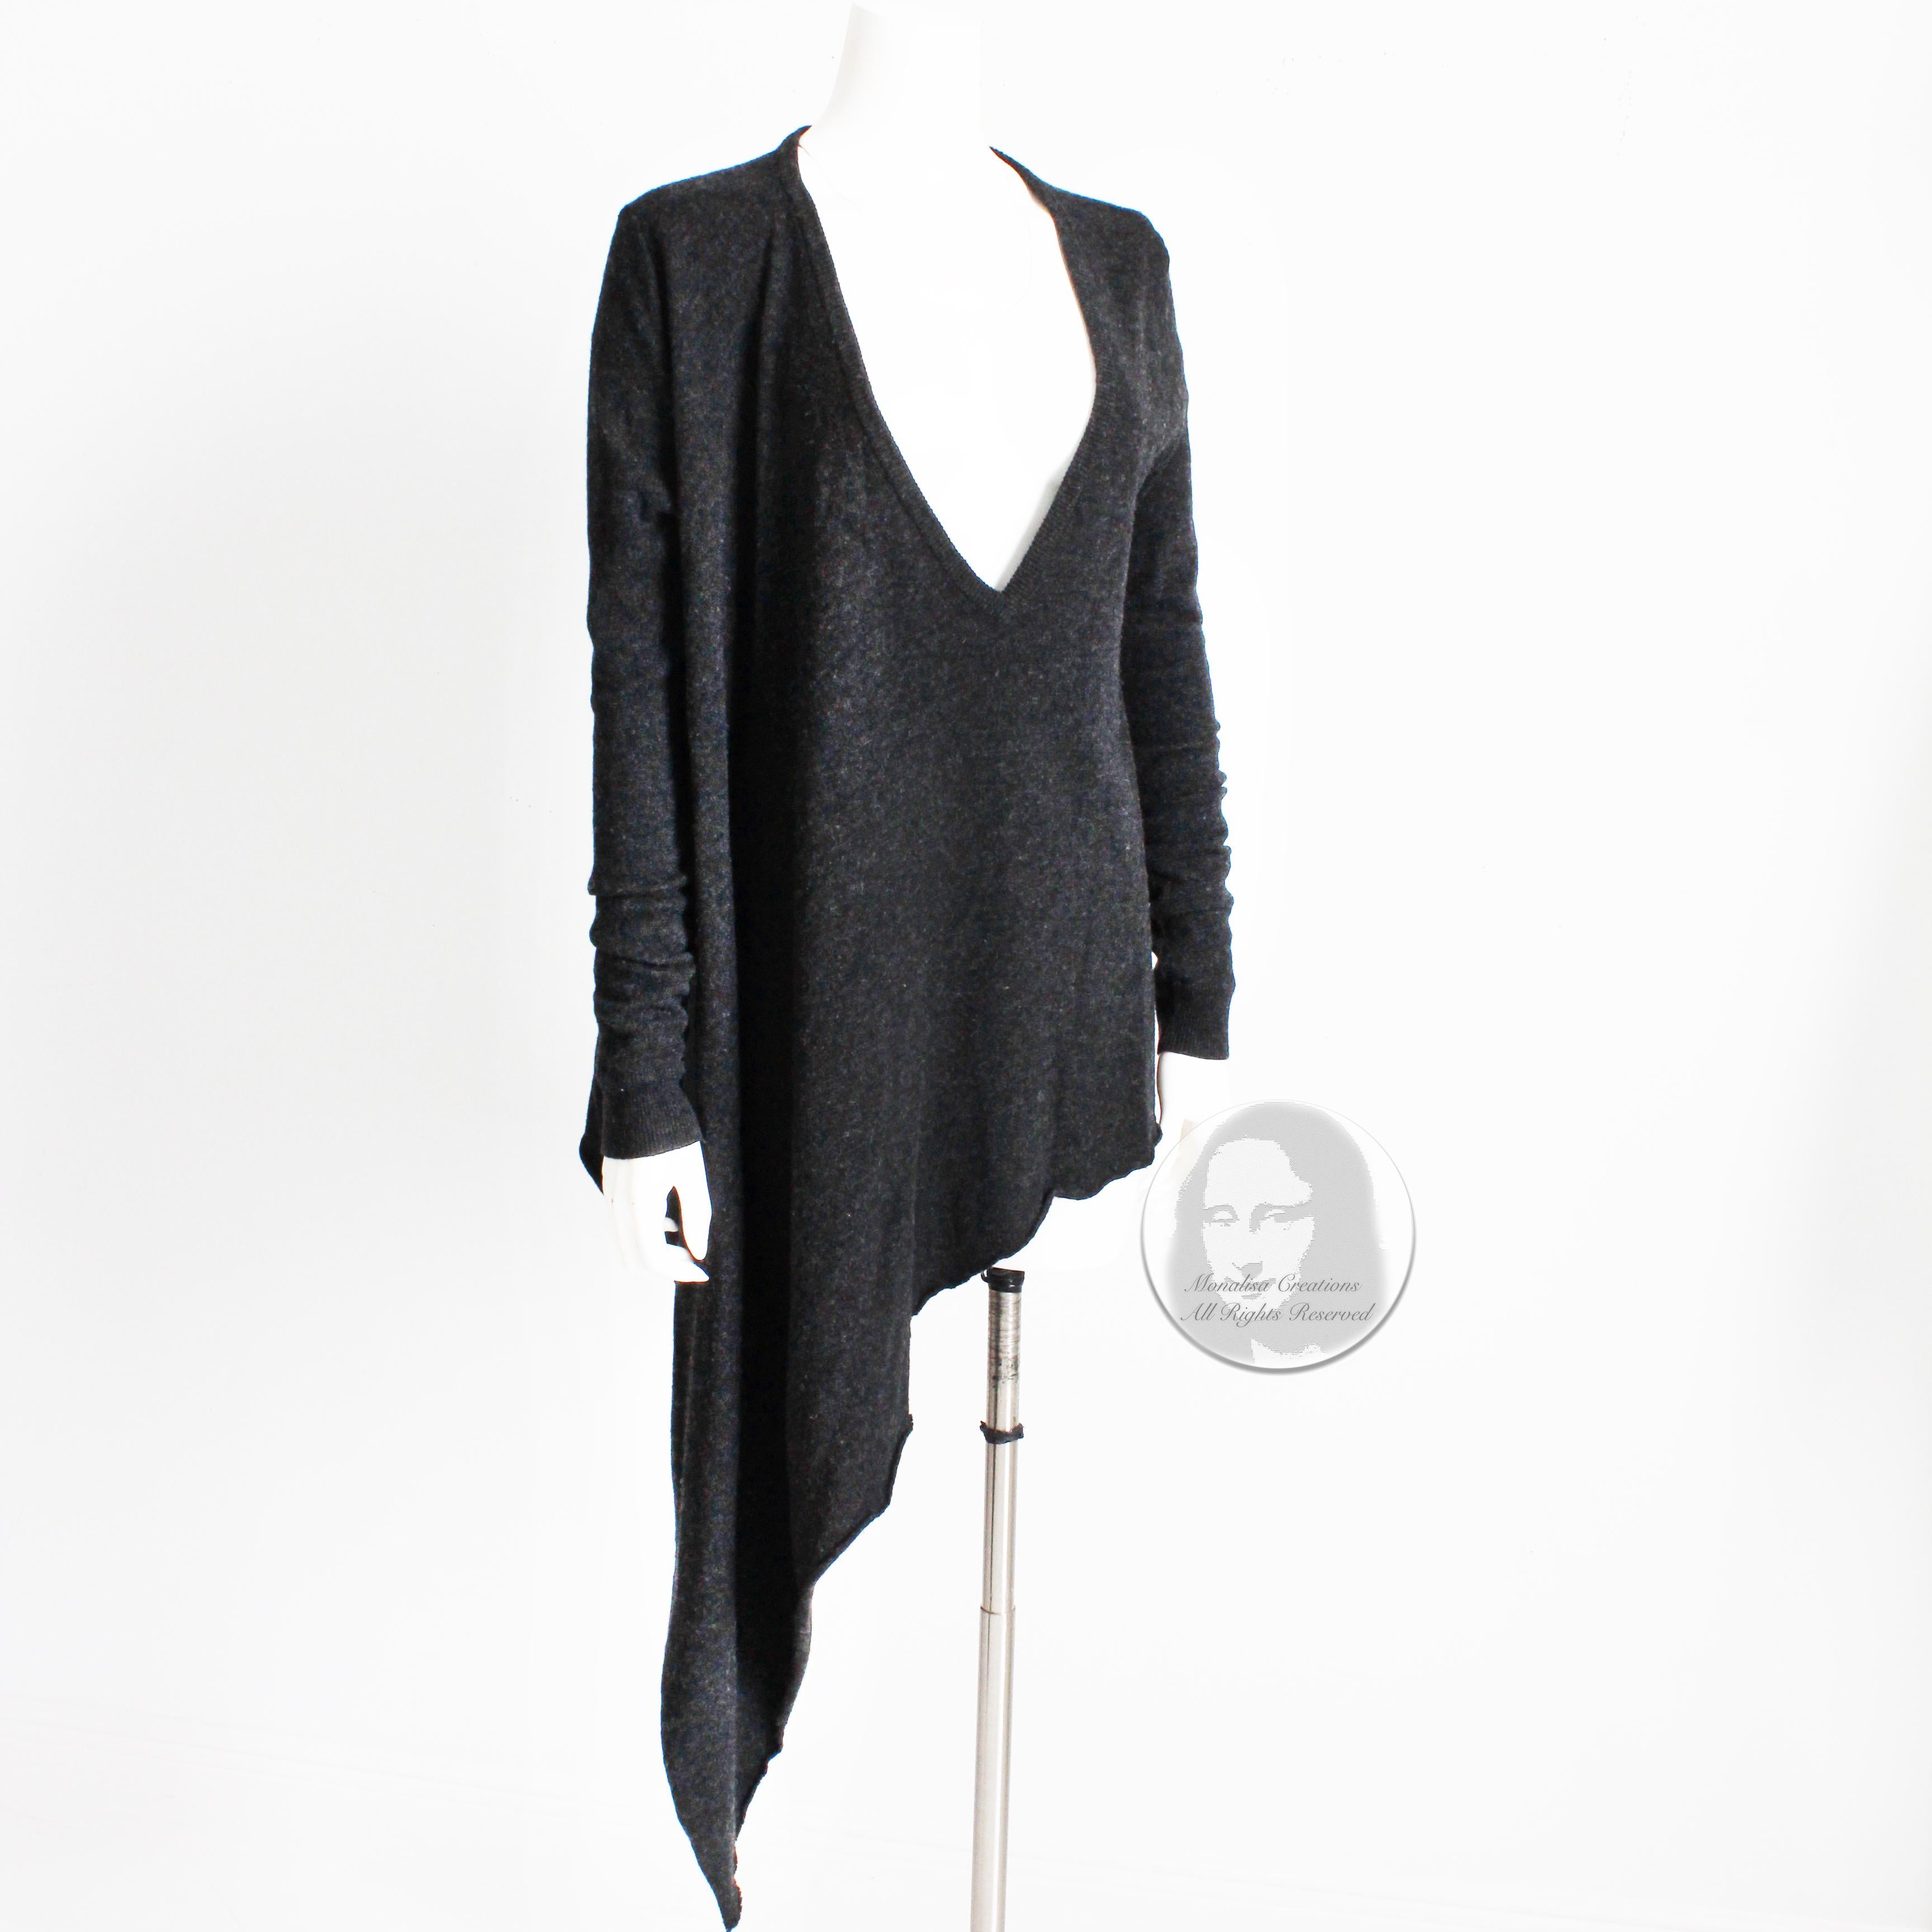 This incredible asymmetric wool sweater is from Swedish designer Ann-Sofie Back, circa 2009. Made from 100% wool in a charcoal gray hue, it features a long asymmetric hem & an oversized V-Neck opening. 

Fabulously chic and so easy to style and